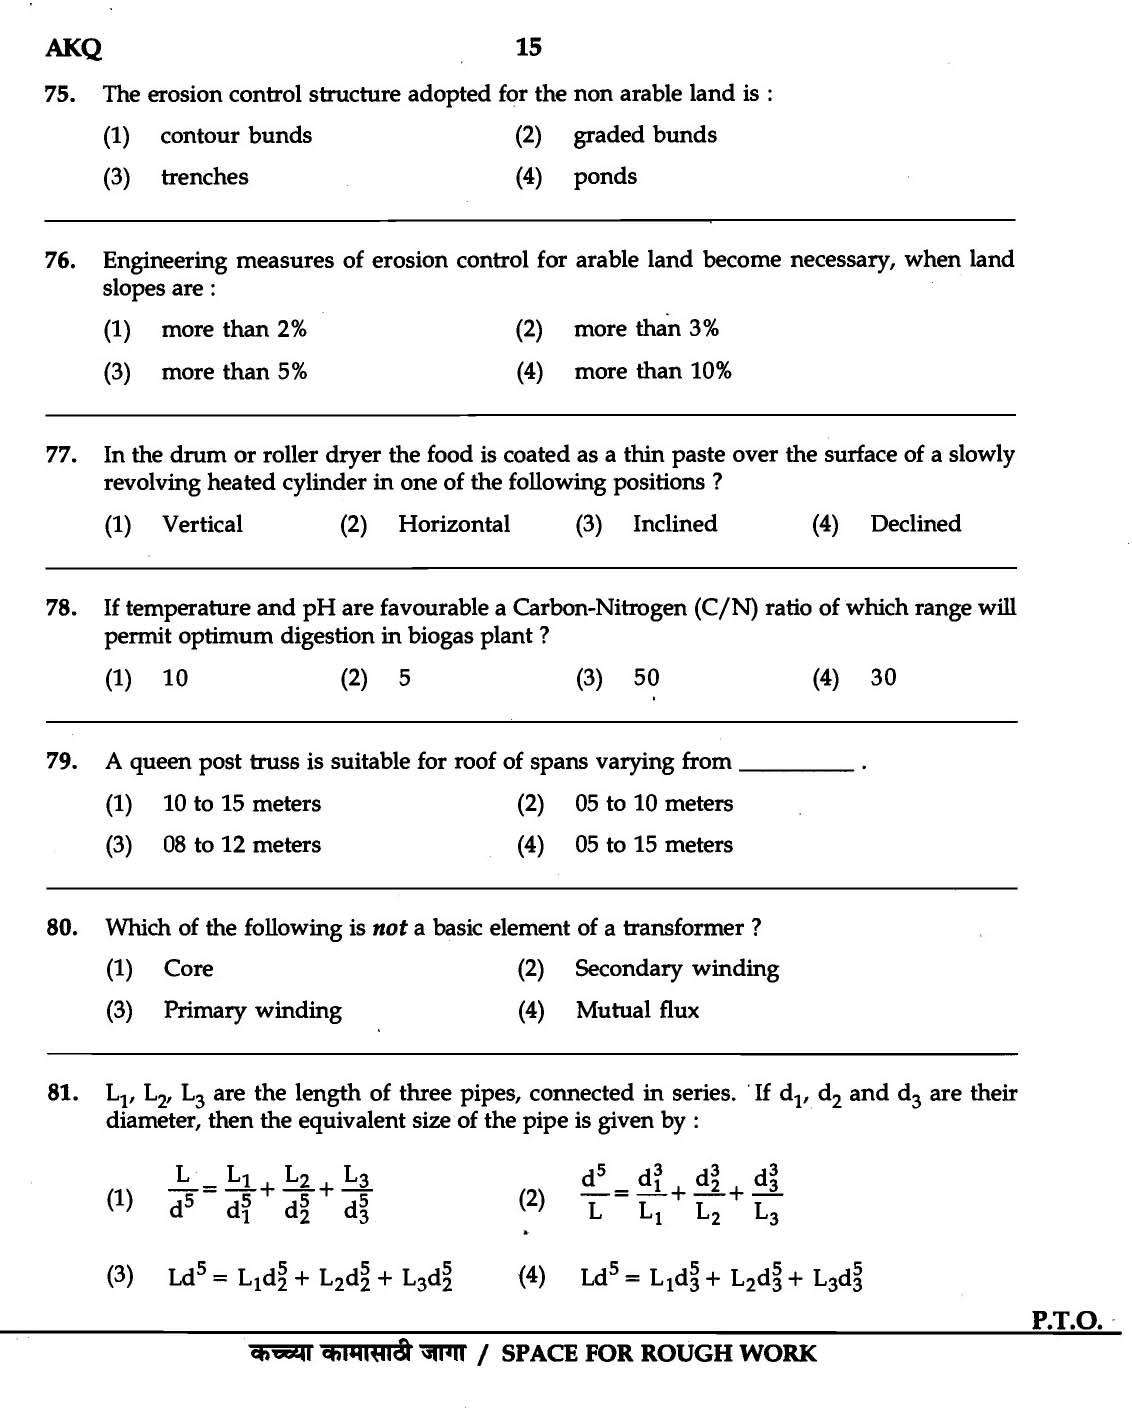 MPSC Agricultural Services Exam 2007 Question Paper Agricultural Engineering 13